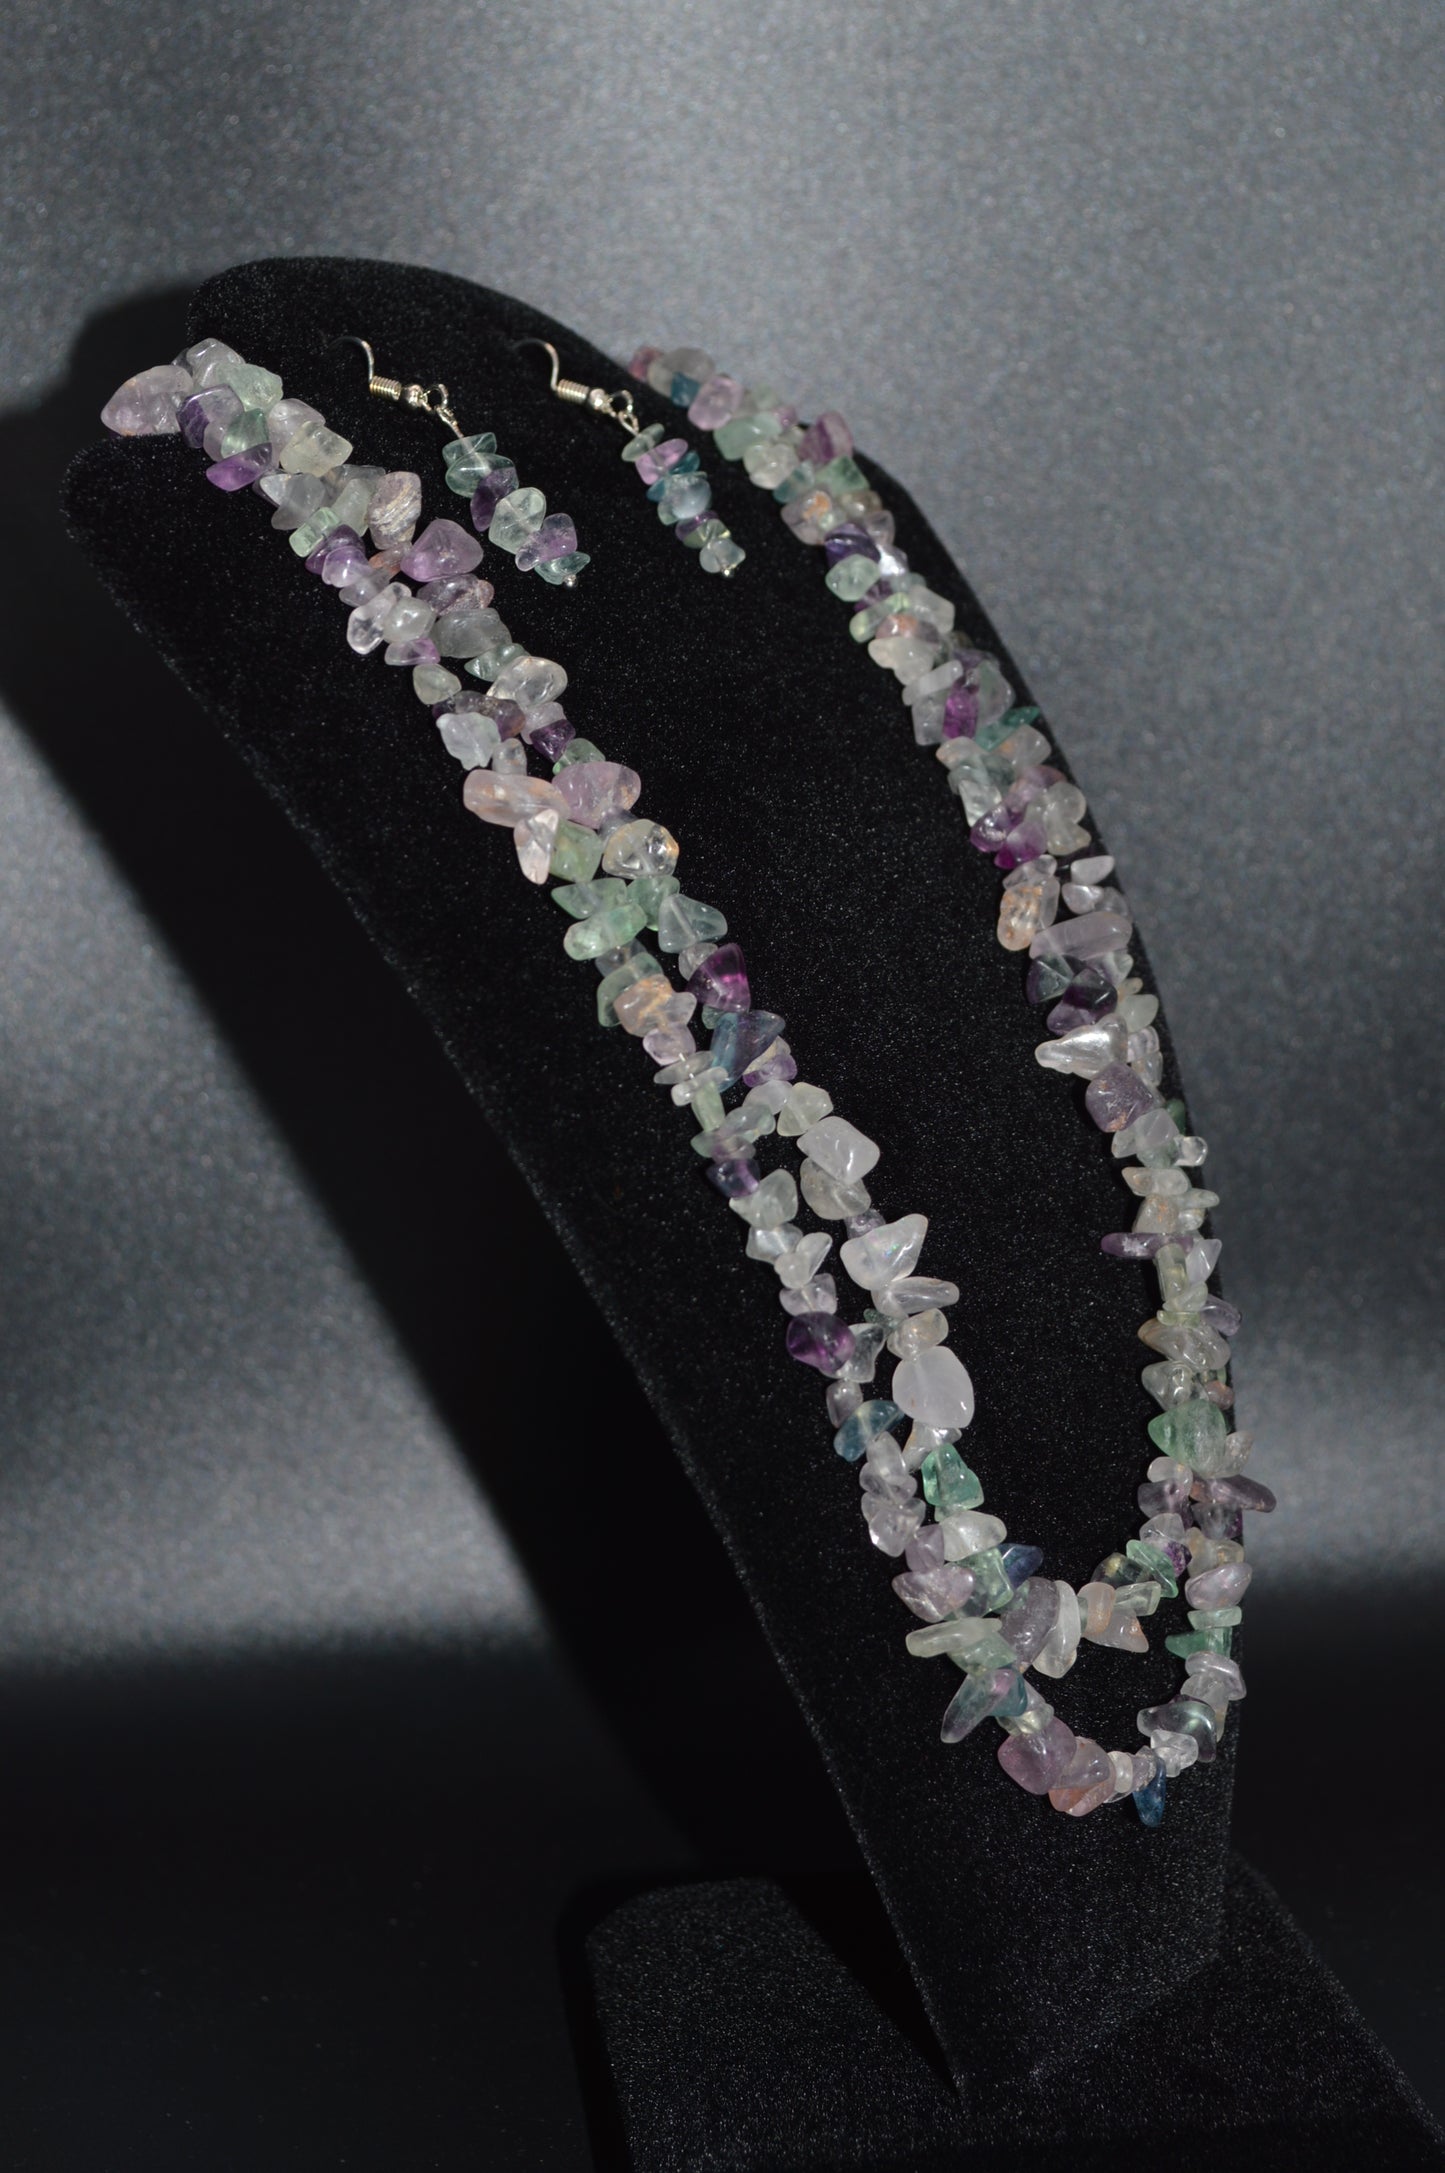 Rainbow Fluorite Chips Double Stranded Necklace and Earring Set